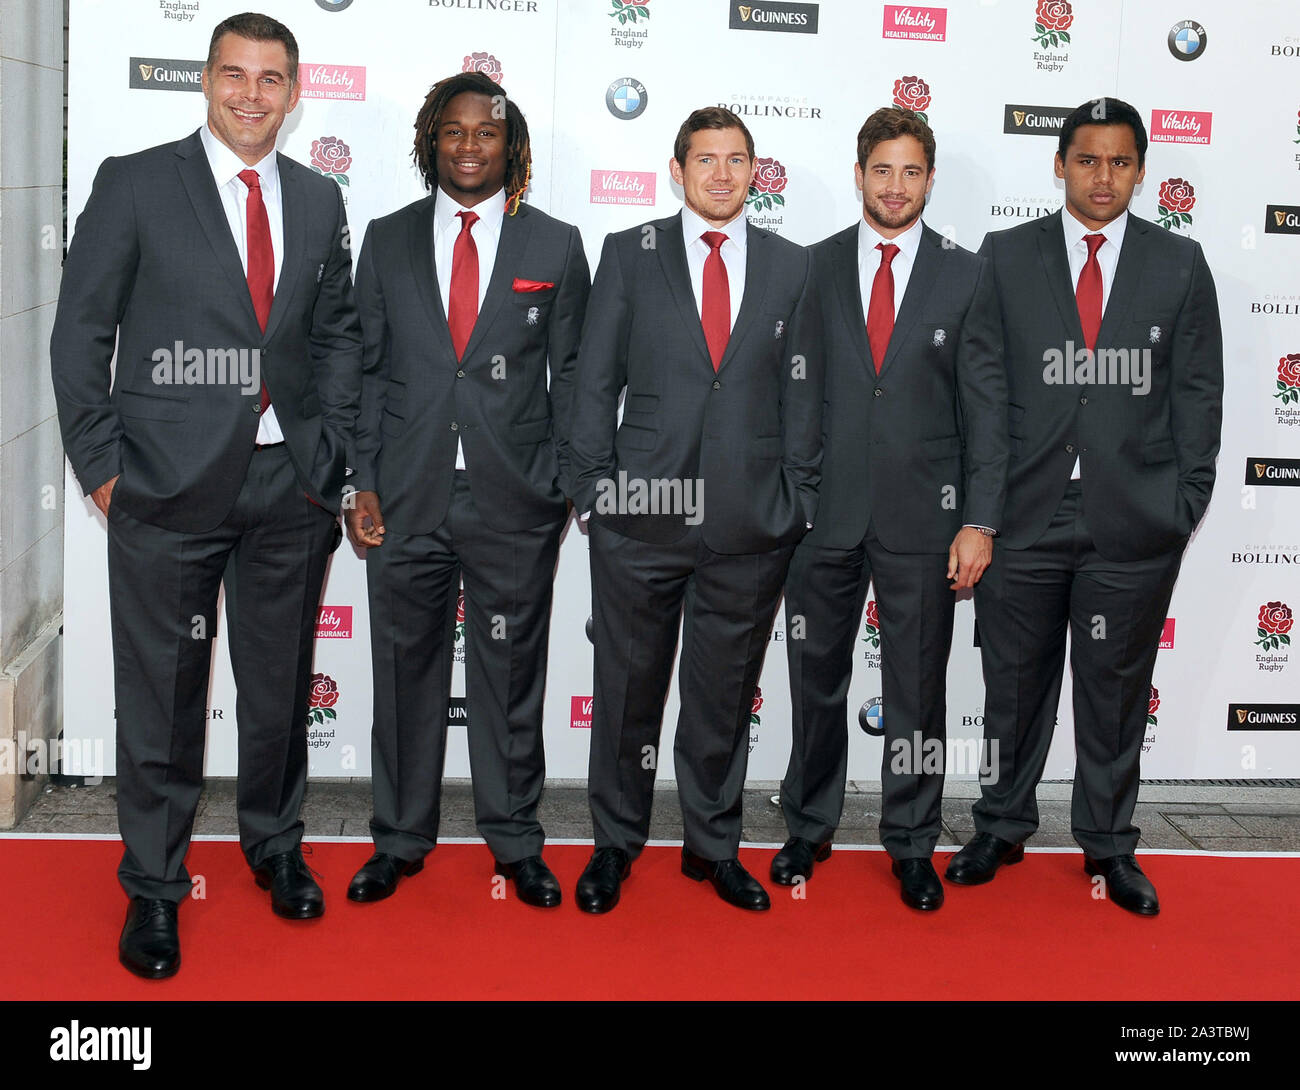 Photo Must Be Credited ©Jeff Spicer/Alpha Press 079852 05/08/2015 England Rugby Team, Nick Easter, Marland Yarde, Alex Goode, Danny Cipriani at the Carry Them Home Rugby Dinner held at Grosvenor House London Stock Photo